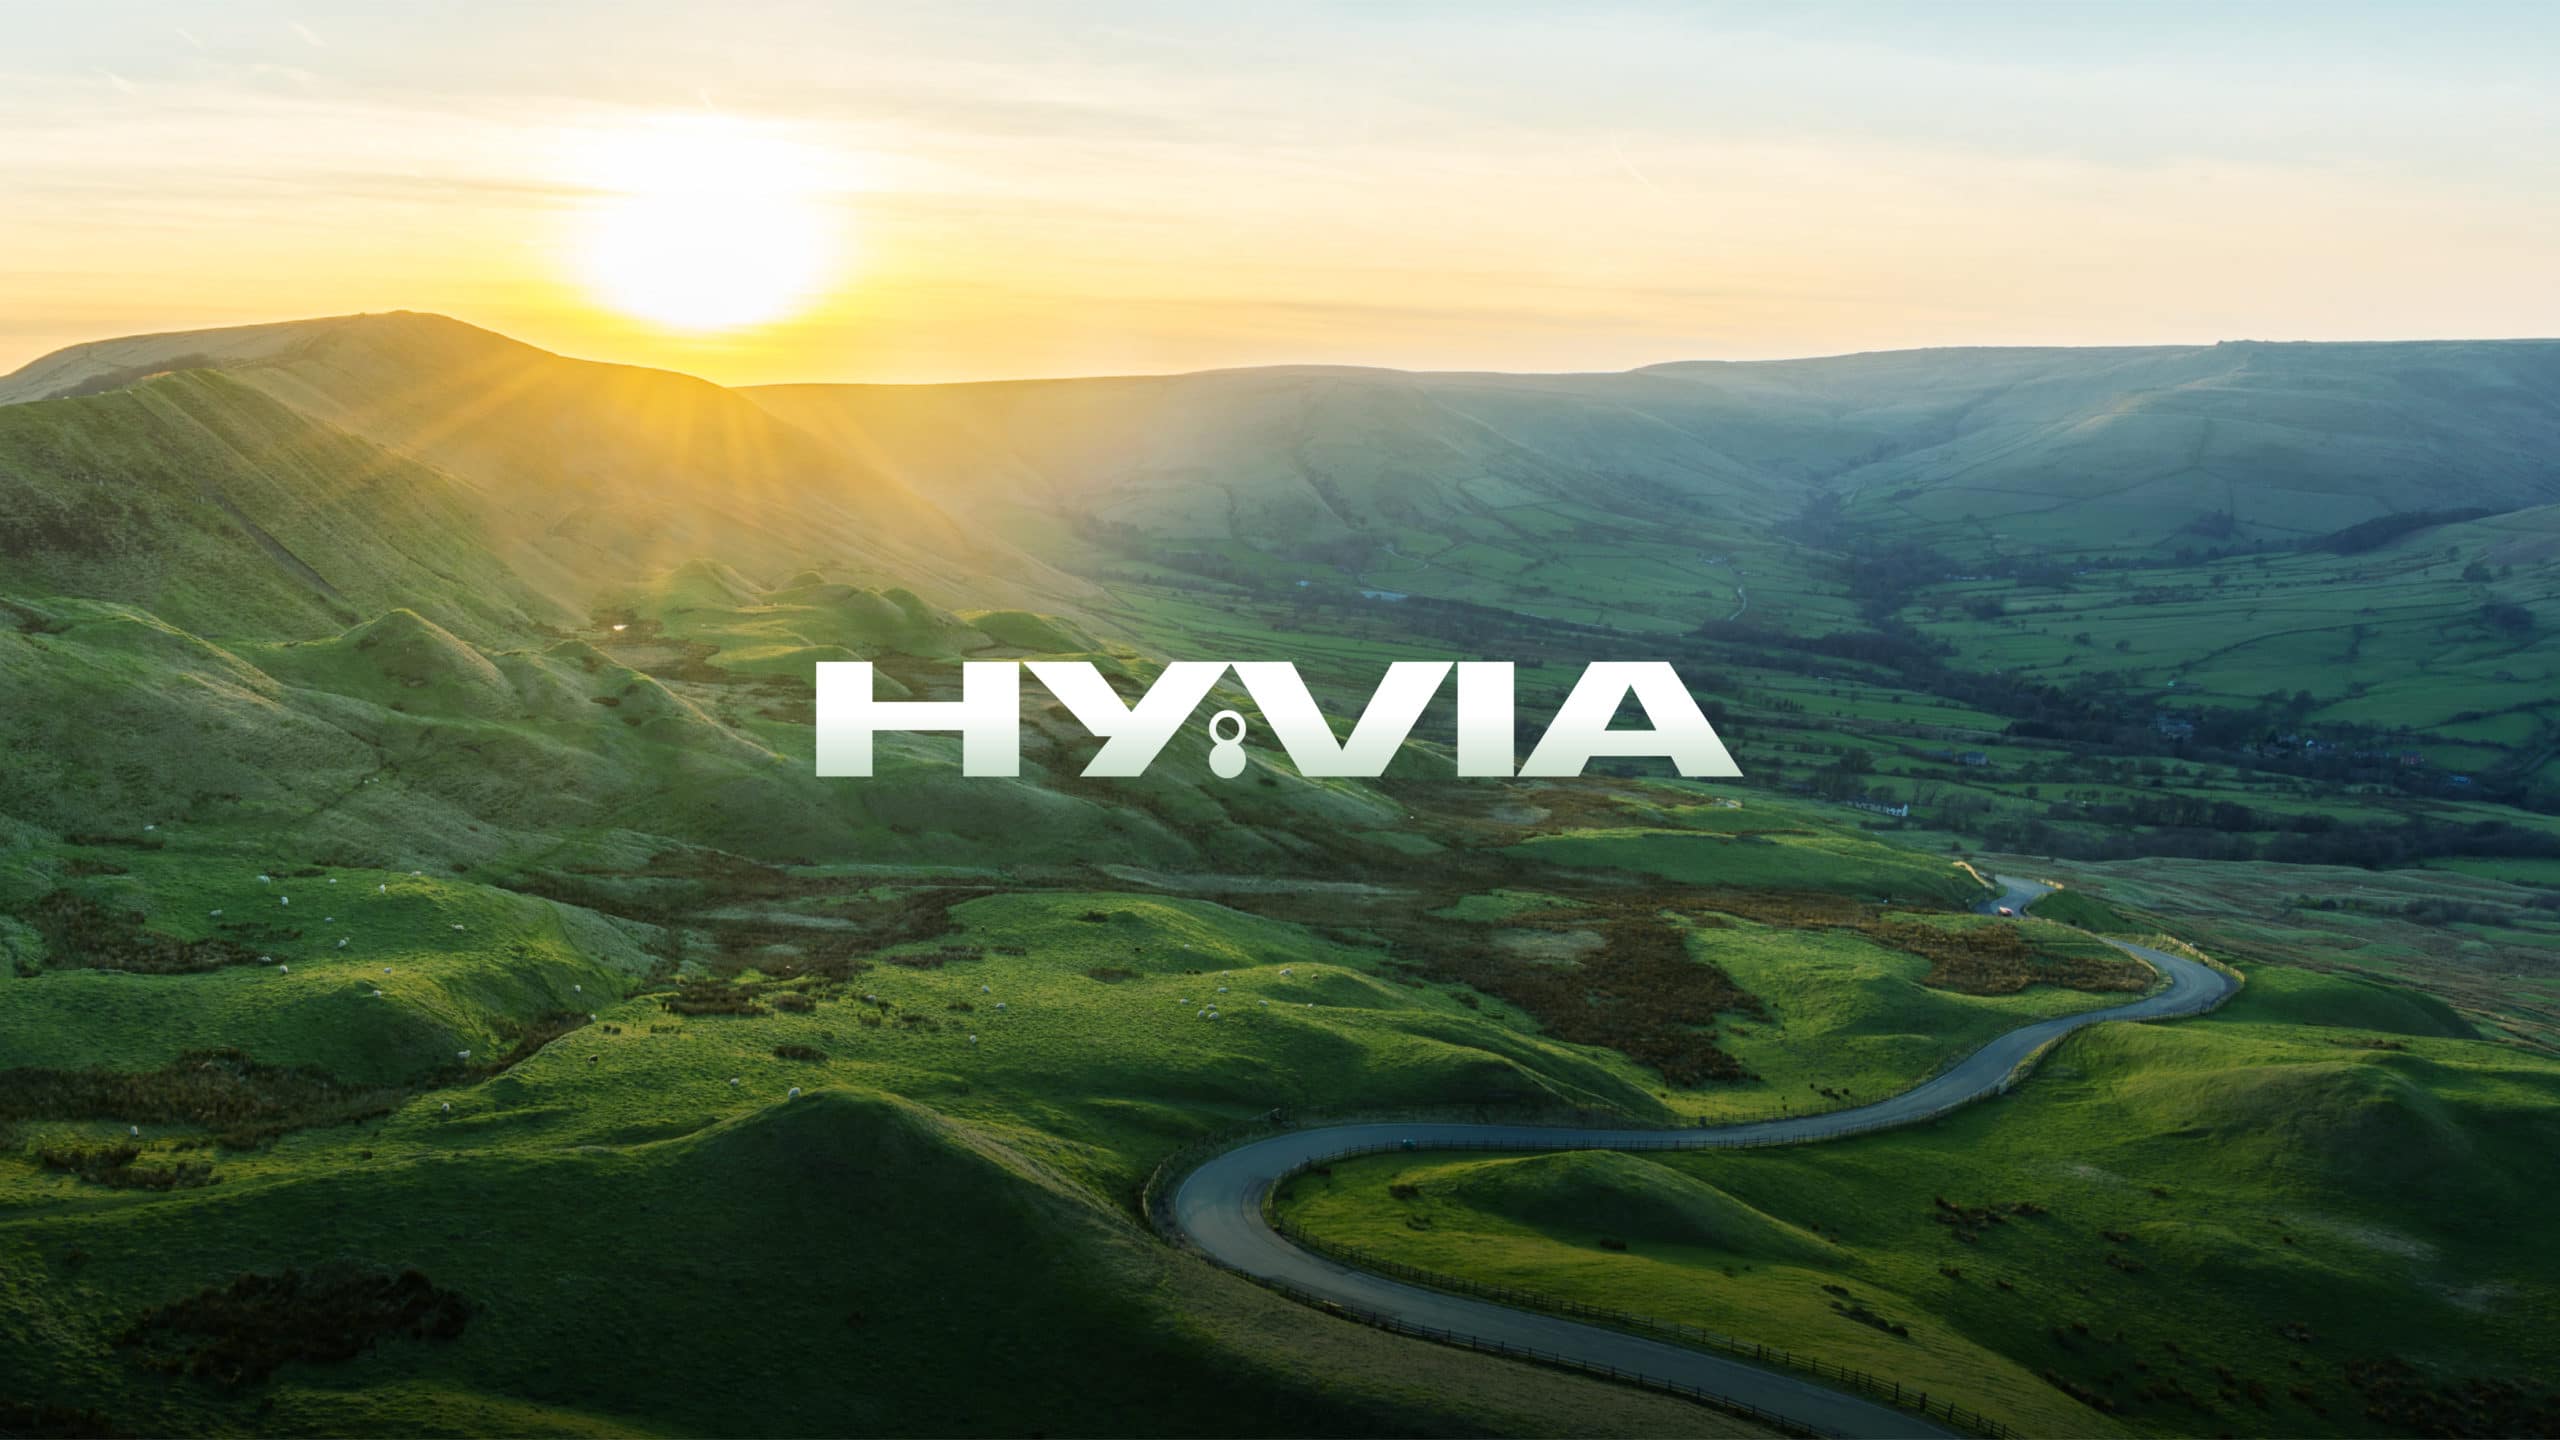 HYVIA: RENAULT GROUP AND PLUG POWER’S JOINT VENTURE LEADS THE WAY TO A COMPLETE ECOSYSTEM OF FUEL CELL POWERED LCVS, GREEN HYDROGEN AND REFUELING STATIONS ACROSS EUROPE